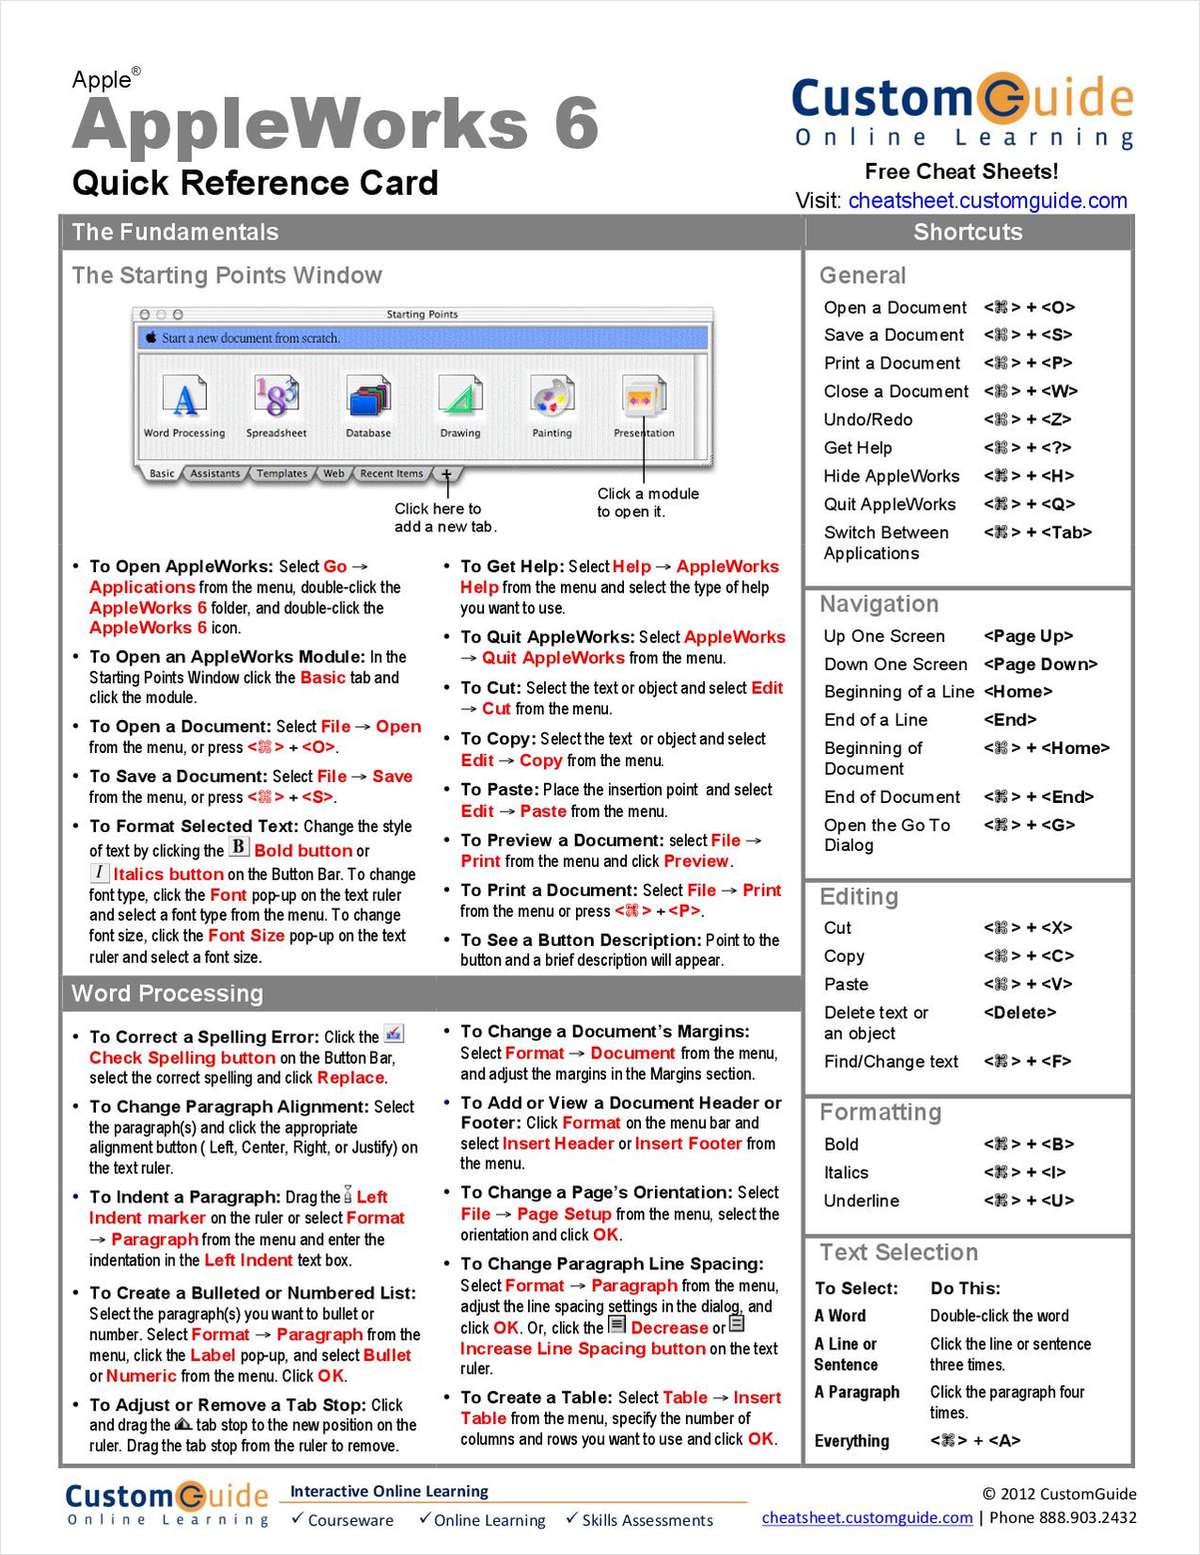 AppleWorks 6 -- Quick Reference Card